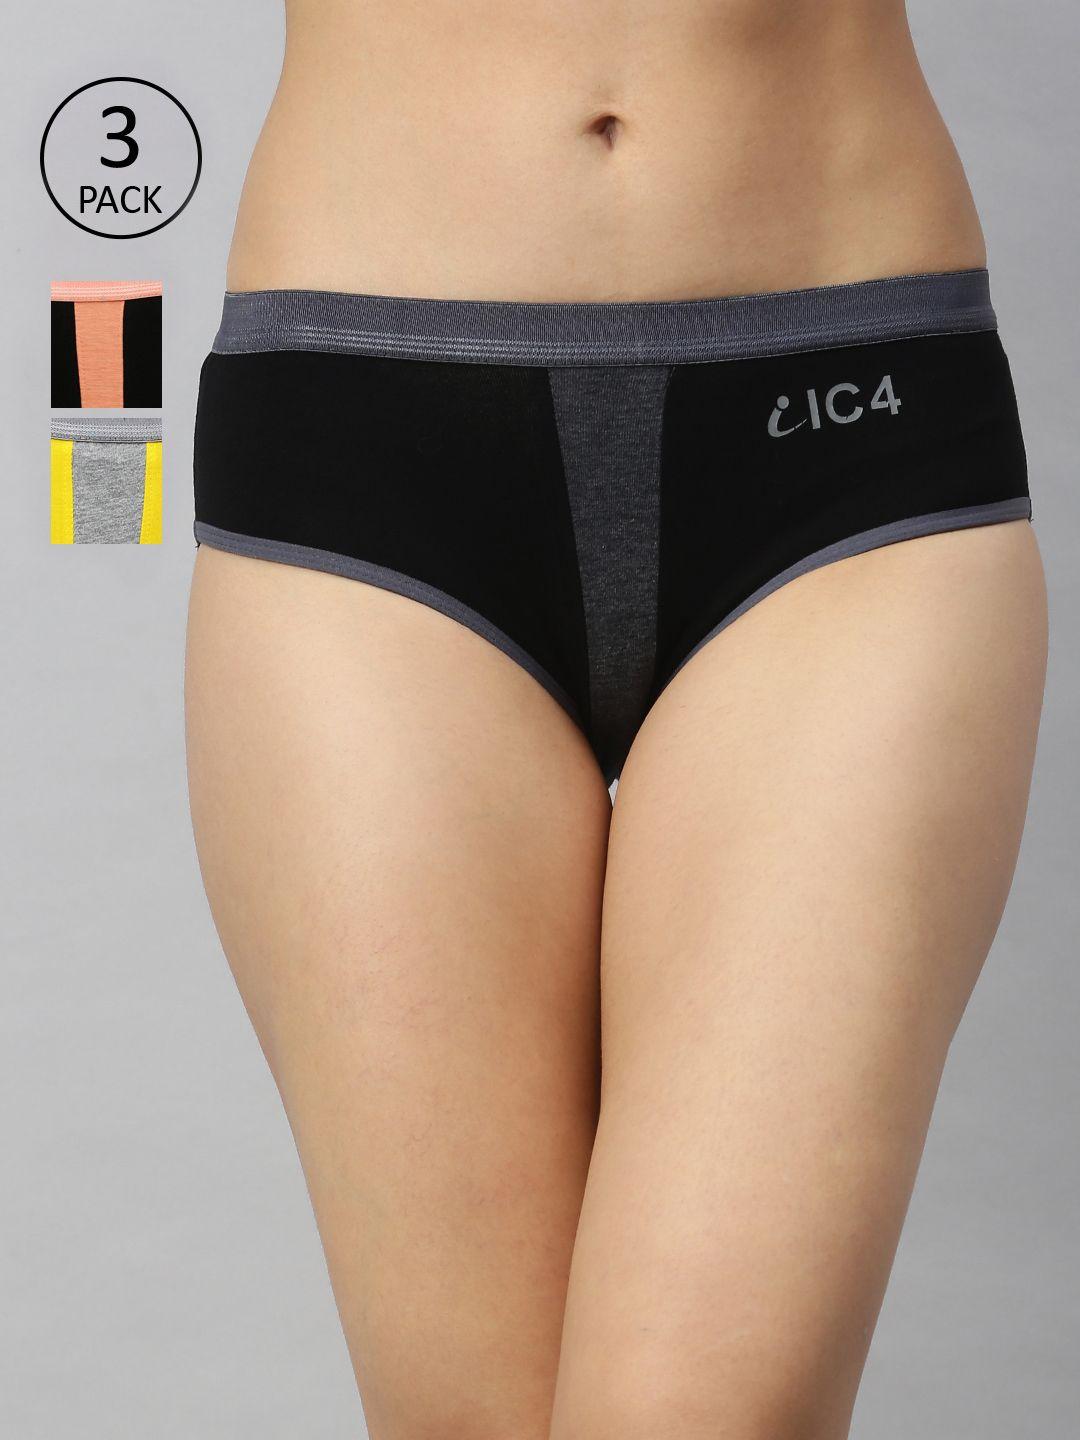 ic4 women pack of 3 mid-rise printed basic briefs 0bo-yg-bc1005p3